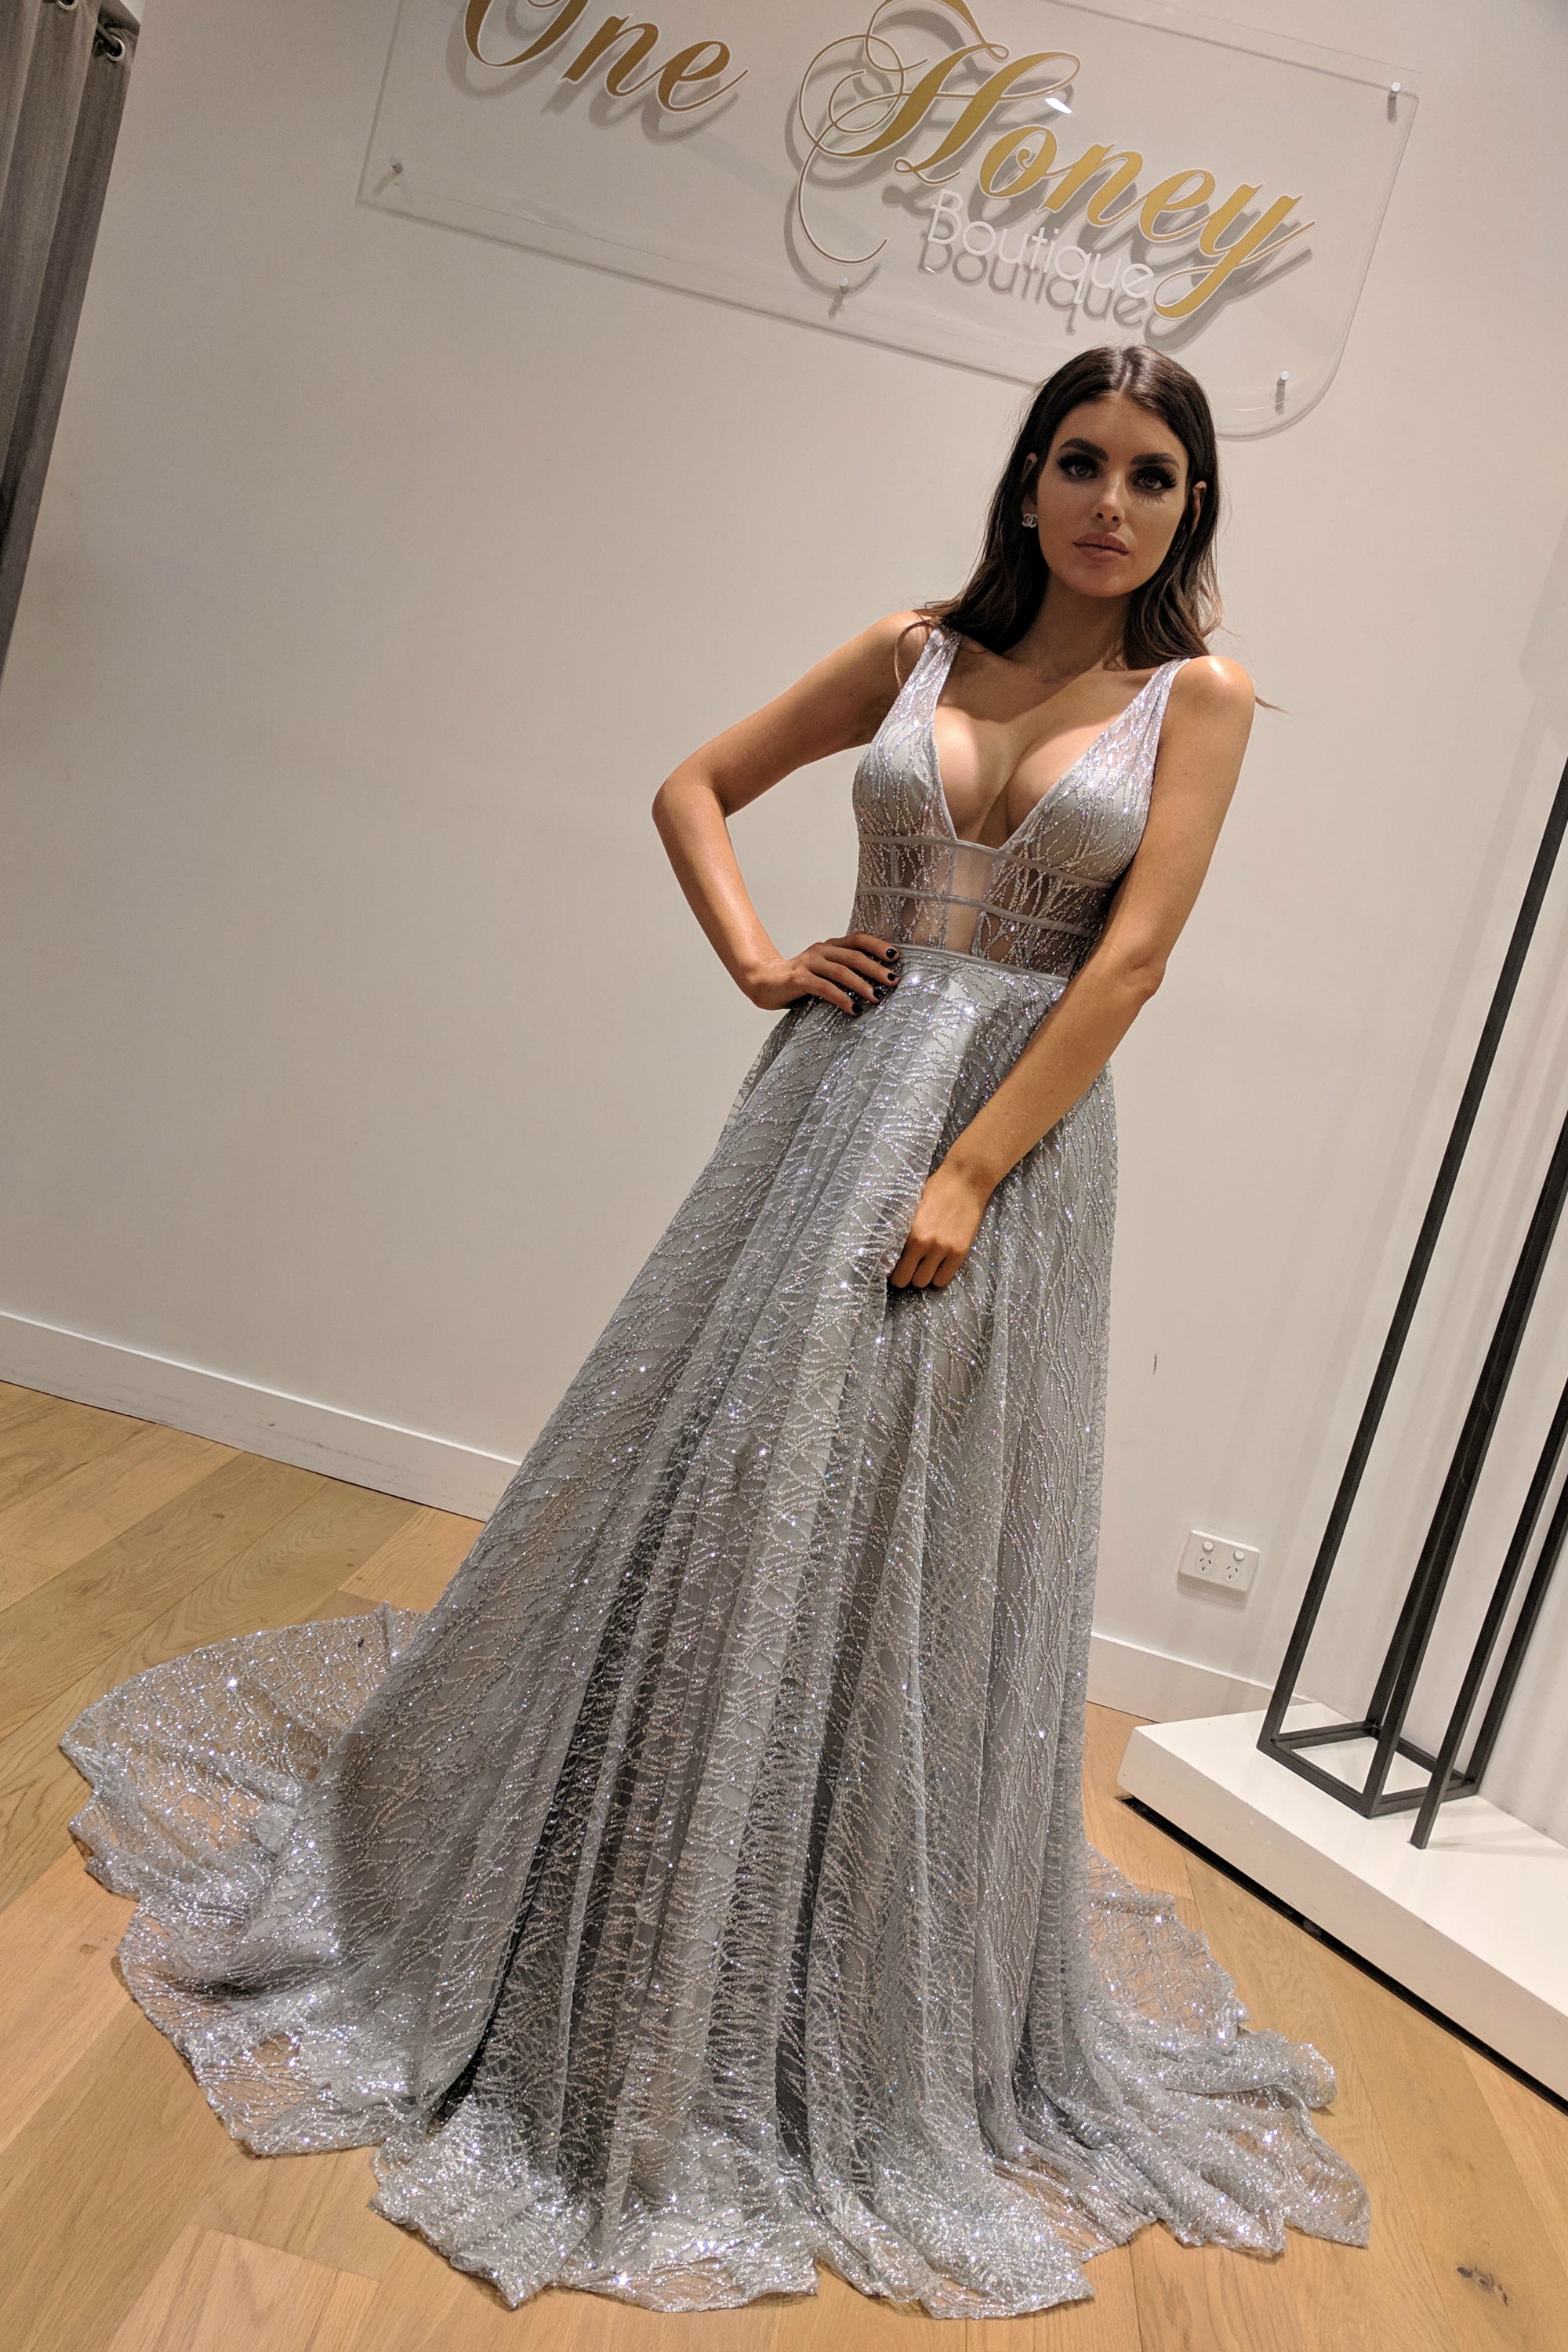 Honey Couture DAZZLING Silver Sequin Princess Formal Gown Dress Honey Couture Custom$ AfterPay Humm ZipPay LayBuy Sezzle